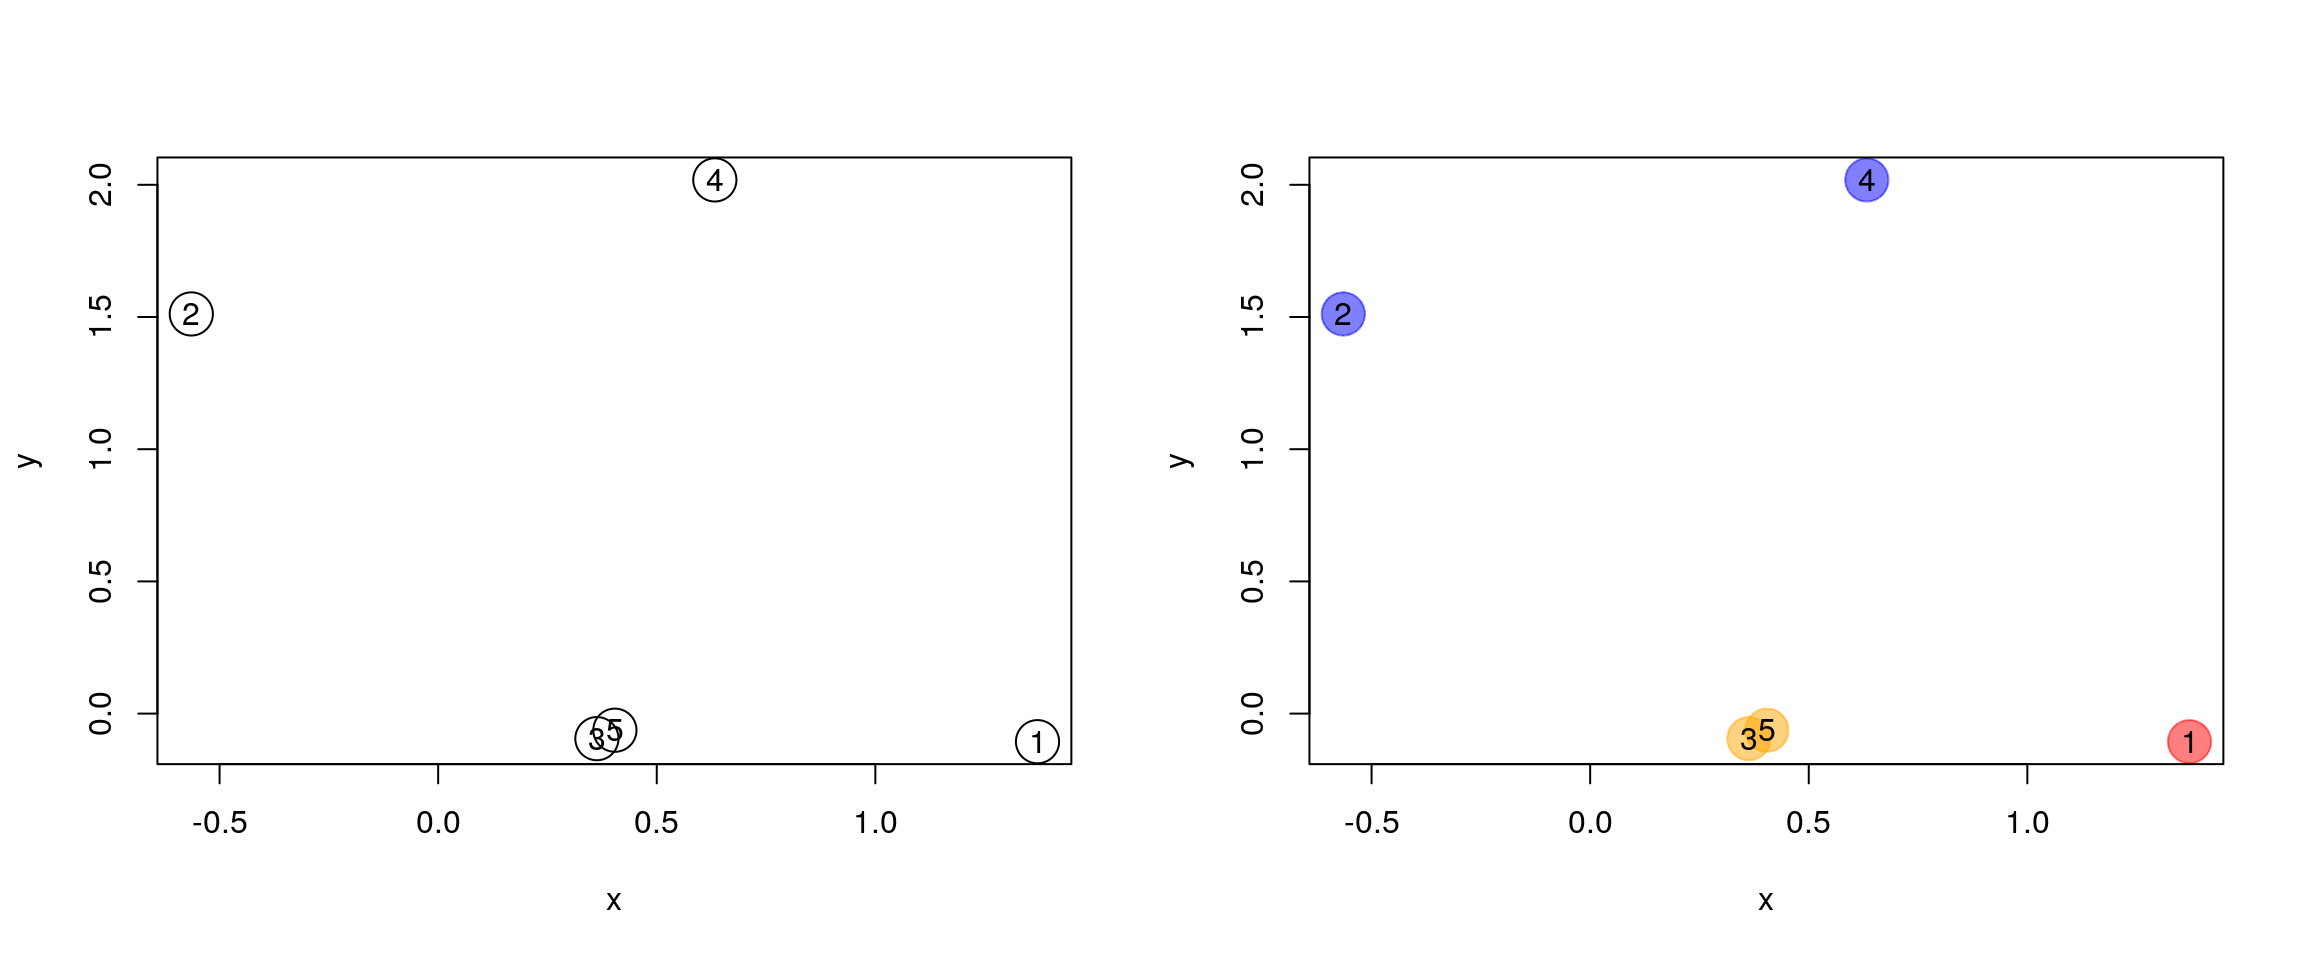 Hierarchical clustering: initialisation (left) and colour-coded results after iteration (right).